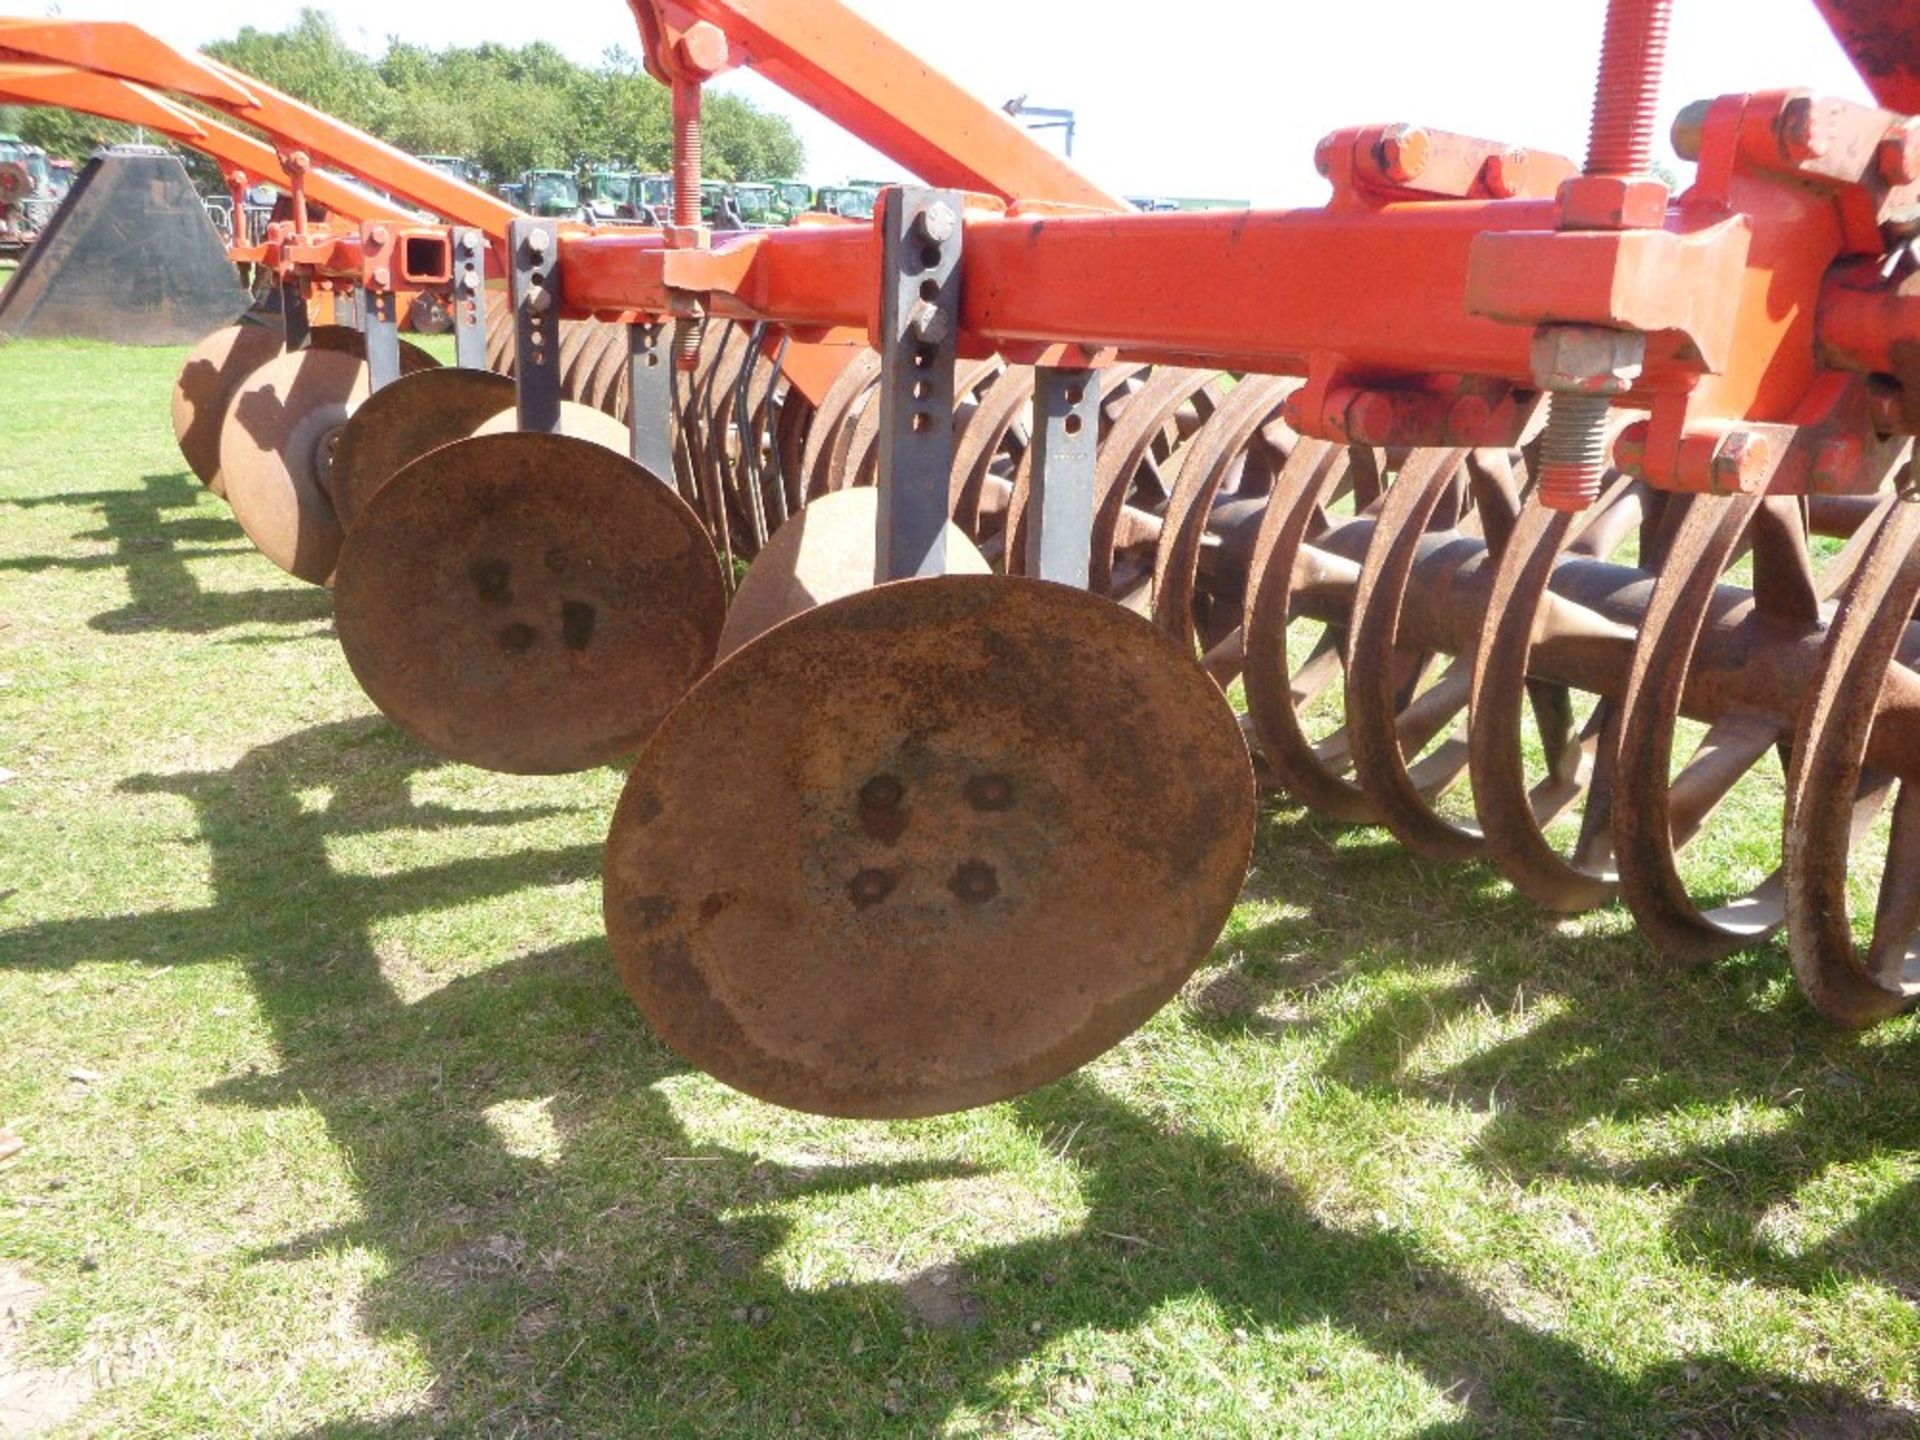 Kuhn Mixter 100 Combination Stubble Cultivator - Image 4 of 4